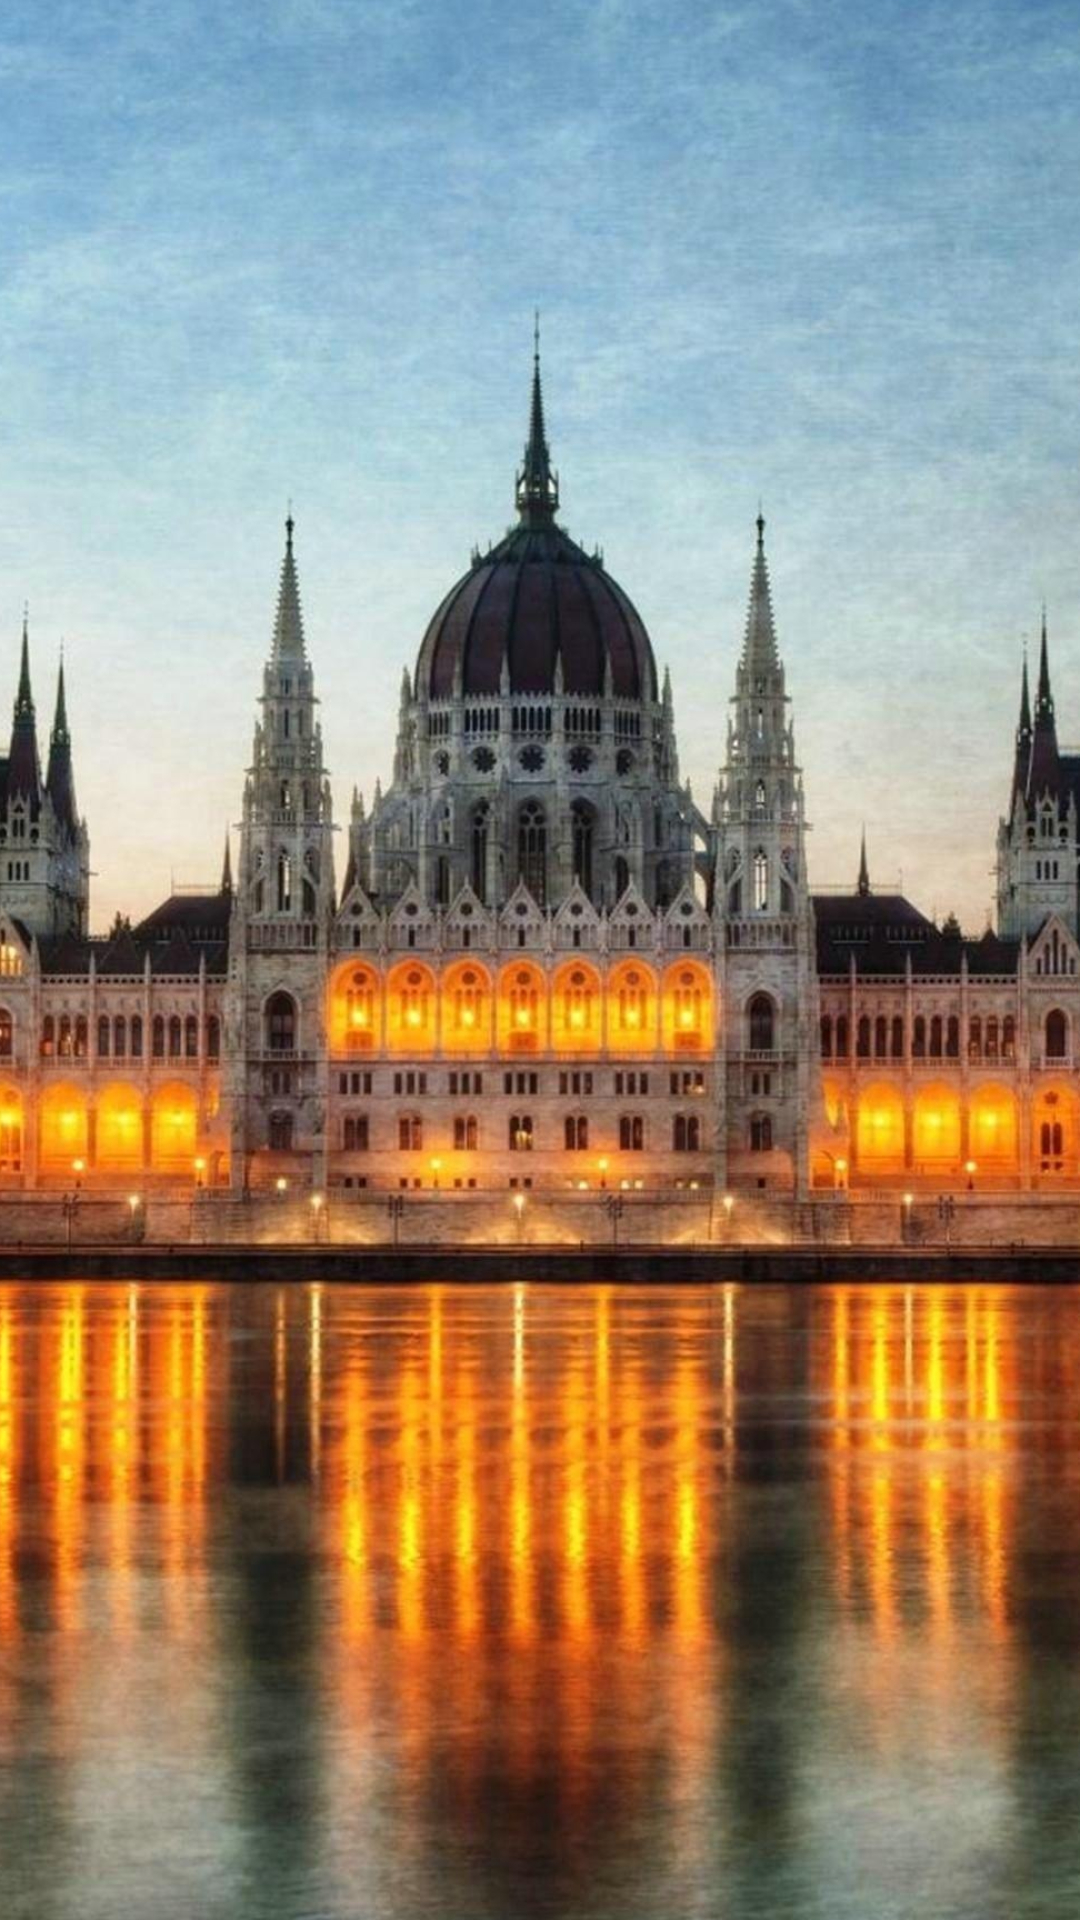 Budapest: The Queen of the Danube, Known for its unique Ruin Bars, gigantic Parliament Building. 1080x1920 Full HD Background.